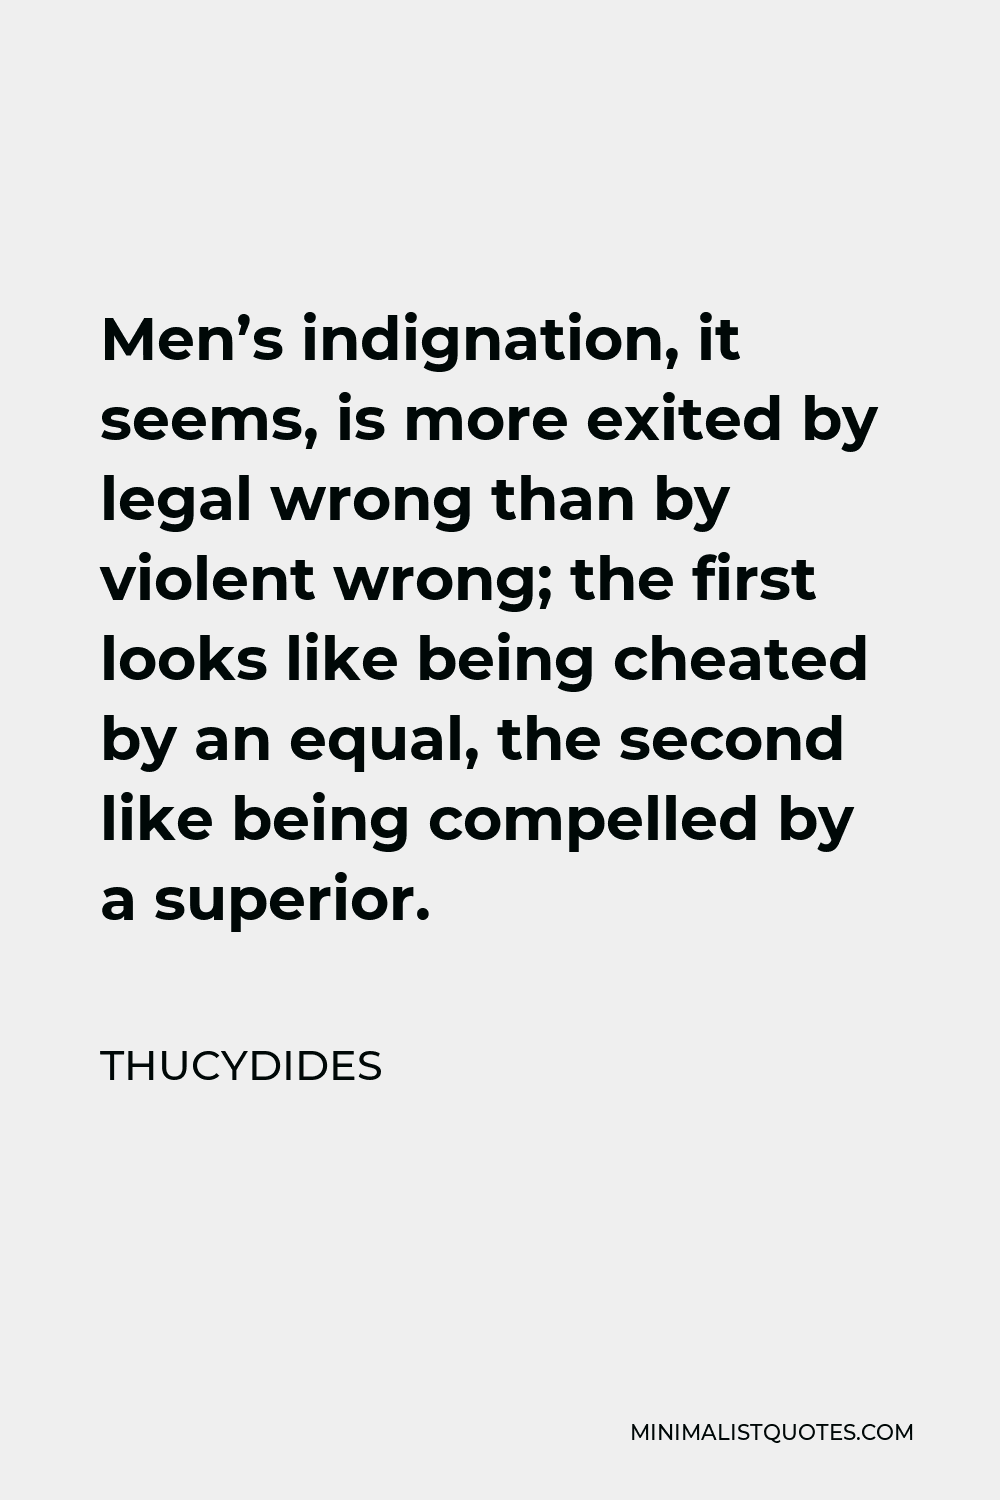 Thucydides Quote - Men’s indignation, it seems, is more exited by legal wrong than by violent wrong; the first looks like being cheated by an equal, the second like being compelled by a superior.